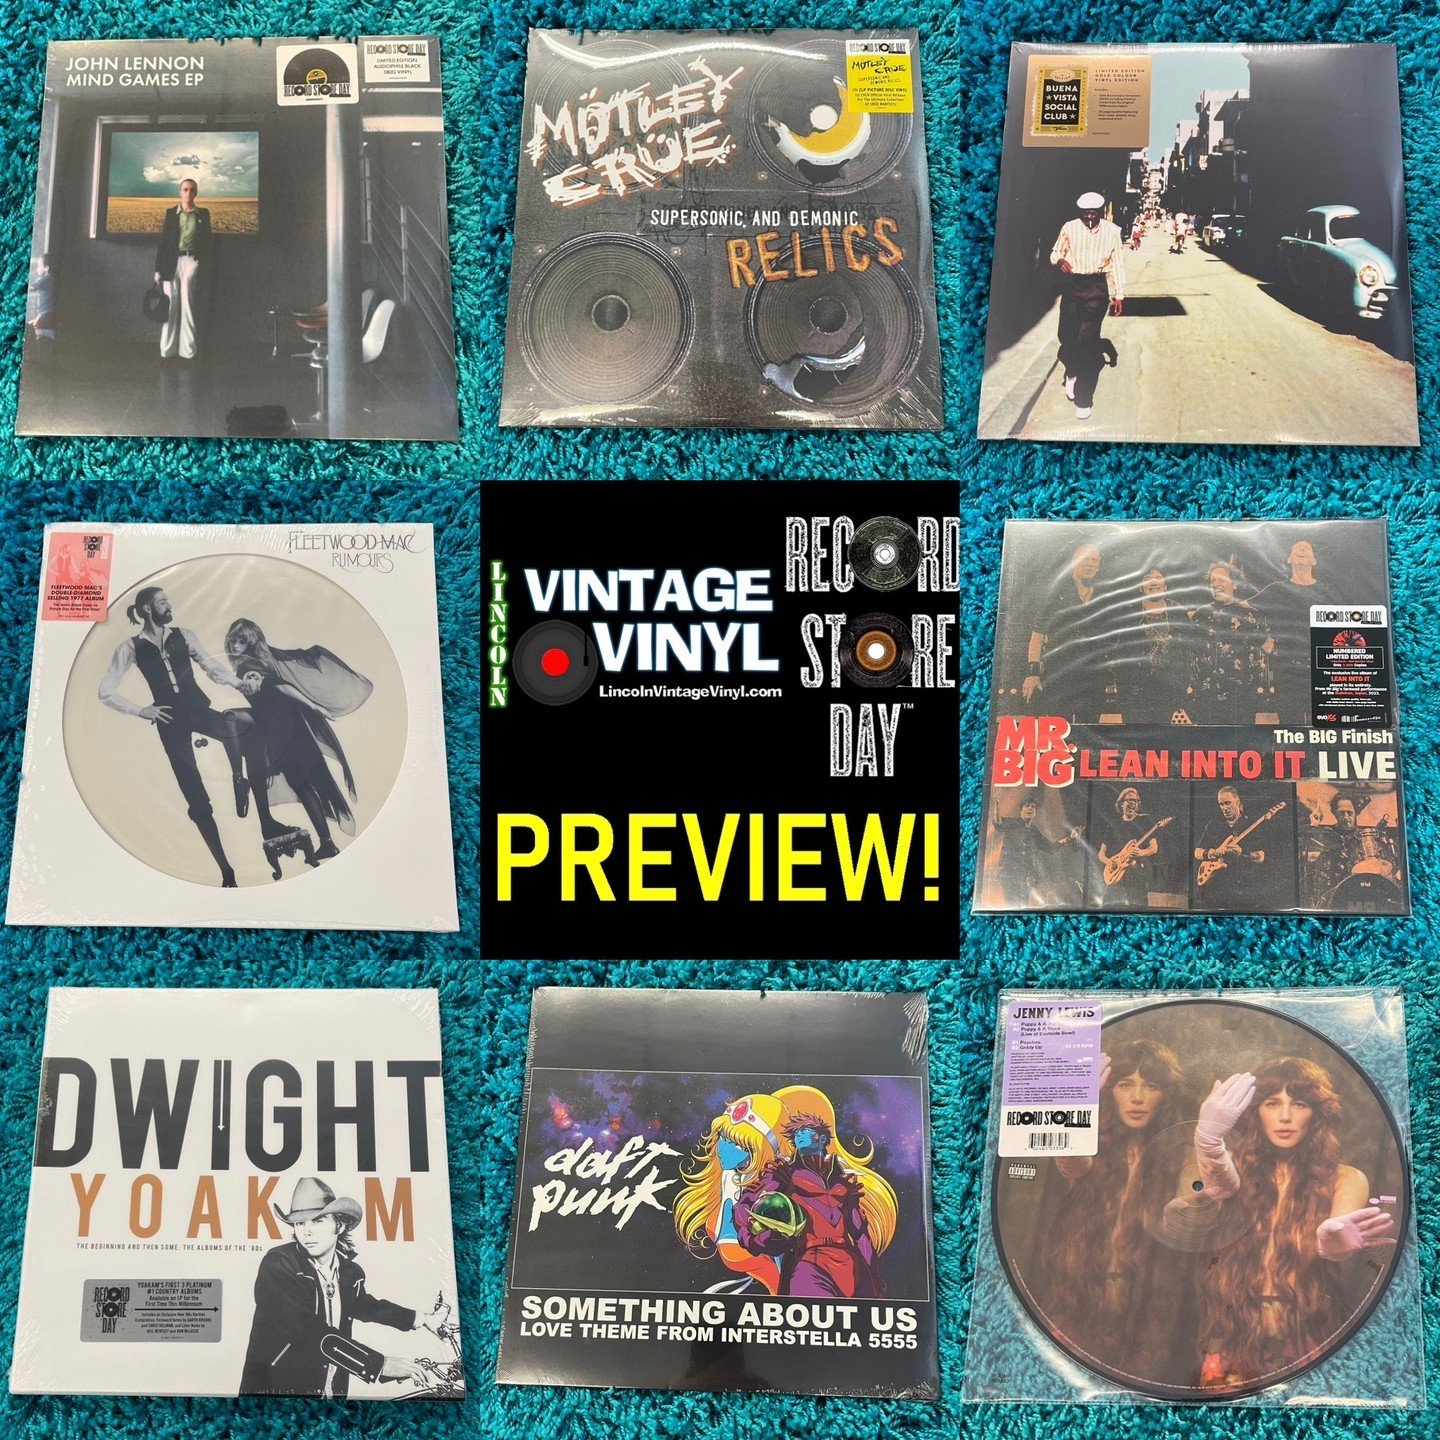 Record Store Day Photo Preview 27! #RSD24 is Saturday April 20th - Open at 7AM! Shop Lincoln Vintage Vinyl FIRST for Lincoln's Largest Selection of RSD Titles! In This Preview: John Lennon, Motley Crue, Buena Vista Social Club, Fleetwood Mac, Mr Big,